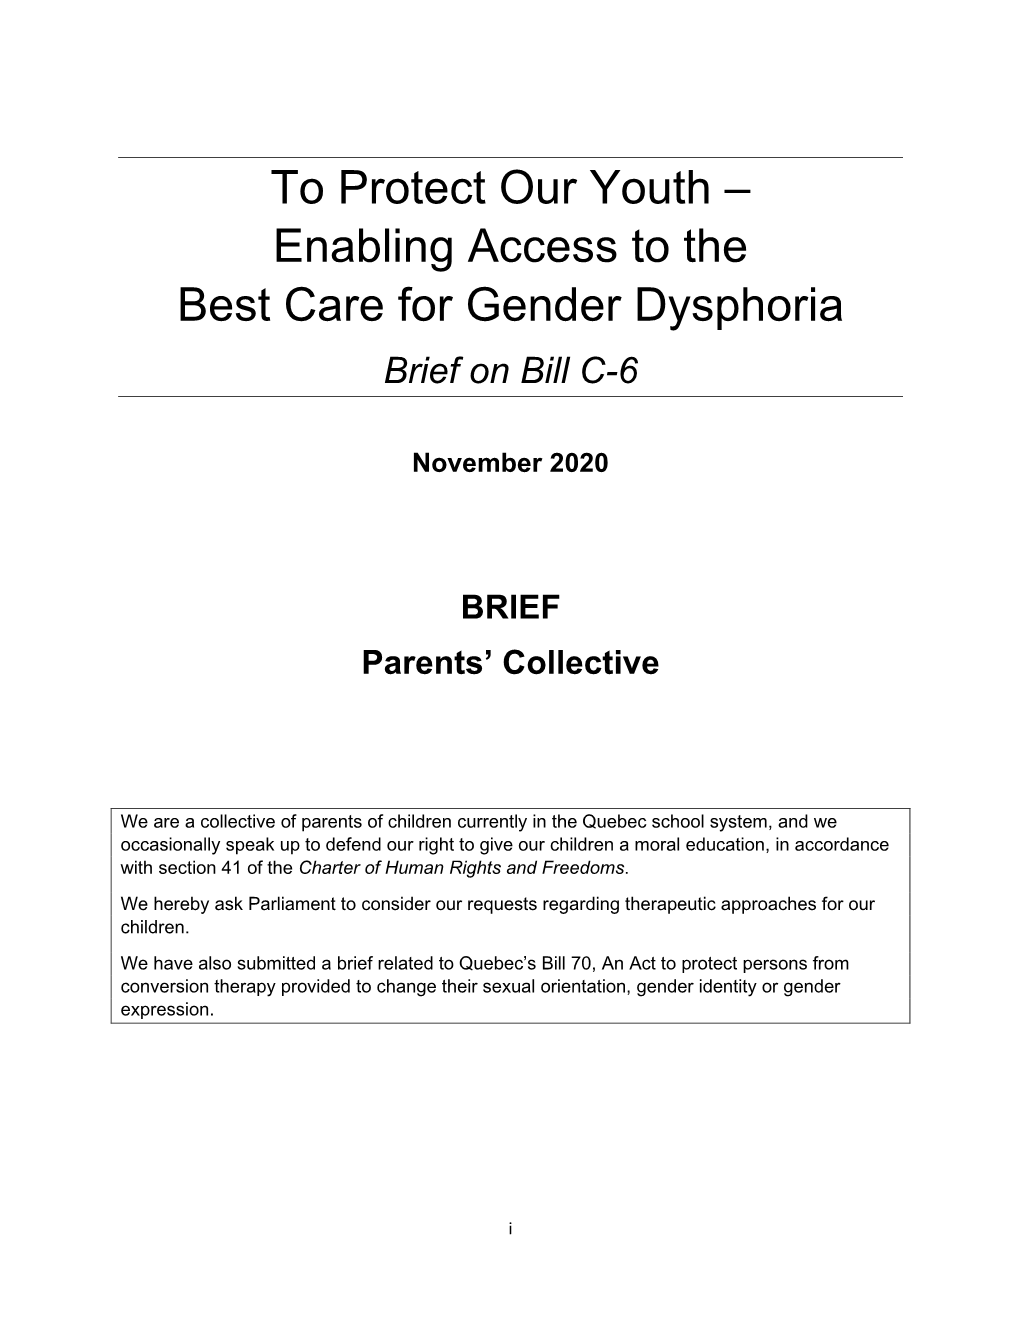 Enabling Access to the Best Care for Gender Dysphoria Brief on Bill C-6